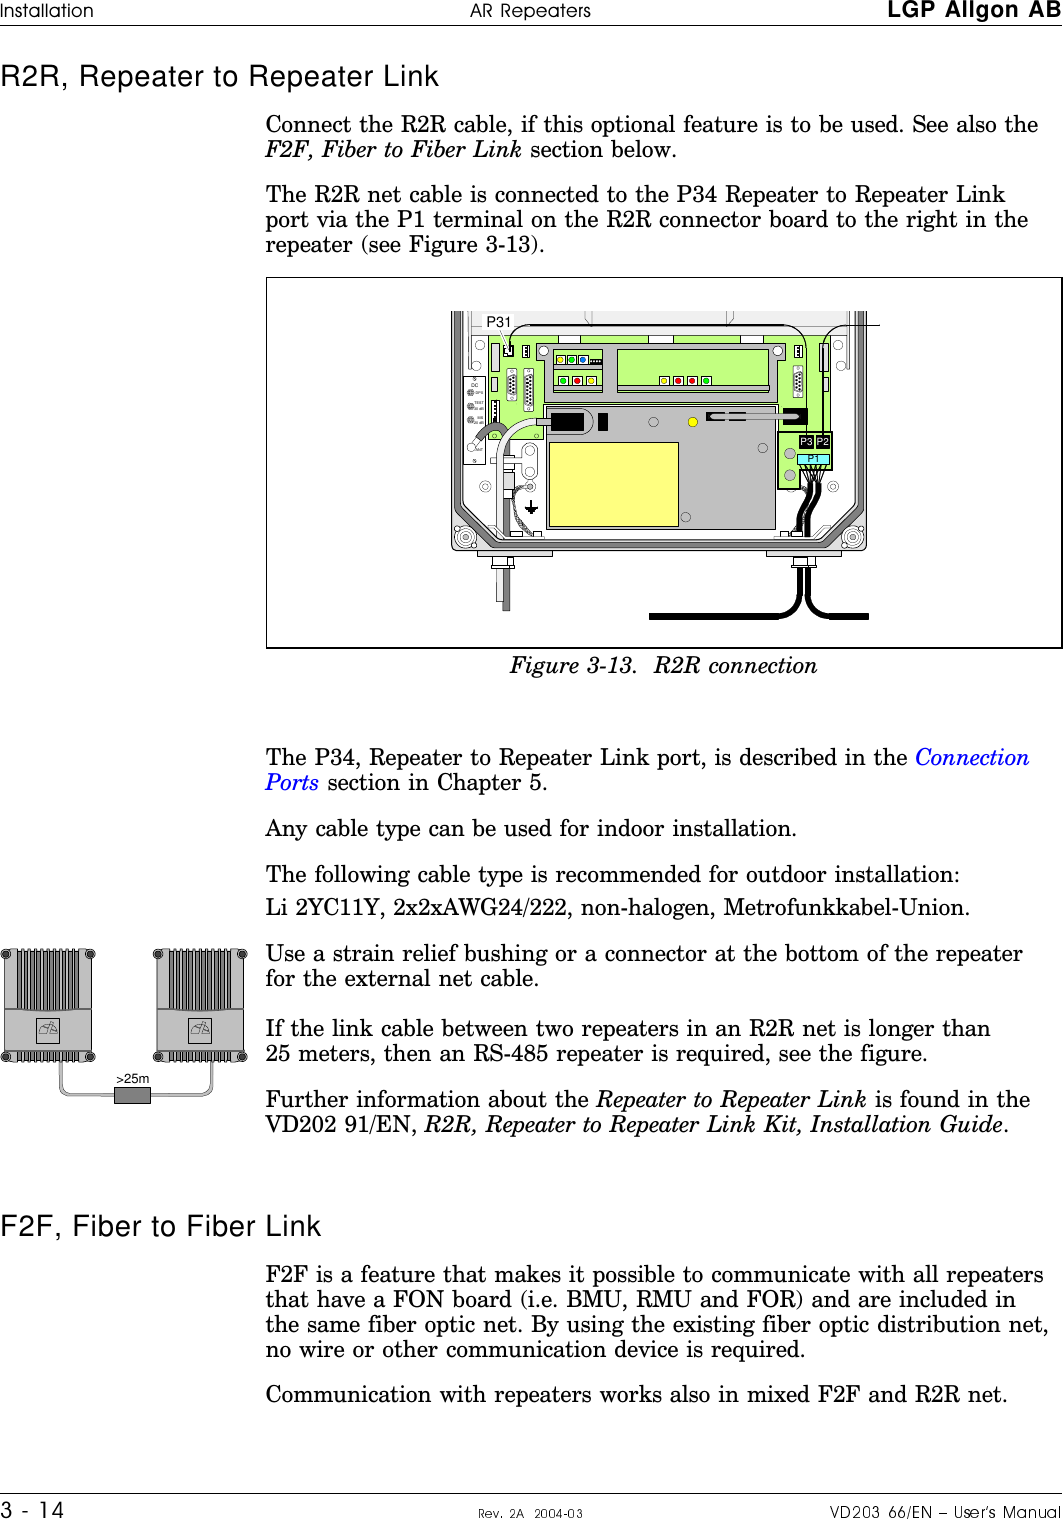 R2R, Repeater to Repeater Link Connect the R2R cable, if this optional feature is to be used. See also theF2F, Fiber to Fiber Link section below.The R2R net cable is connected to the P34 Repeater to Repeater Linkport via the P1 terminal on the R2R connector board to the right in therepeater (see Figure 3-13).The P34, Repeater to Repeater Link port, is described in the ConnectionPorts section in Chapter 5.Any cable type can be used for indoor installation.The following cable type is recommended for outdoor installation:Li 2YC11Y, 2x2xAWG24/222, non-halogen, Metrofunkkabel-Union.Use a strain relief bushing or a connector at the bottom of the repeaterfor the external net cable.If the link cable between two repeaters in an R2R net is longer than25 meters, then an RS-485 repeater is required, see the figure.Further information about the Repeater to Repeater Link is found in theVD202 91/EN, R2R, Repeater to Repeater Link Kit, Installation Guide.F2F, Fiber to Fiber LinkF2F is a feature that makes it possible to communicate with all repeatersthat have a FON board (i.e. BMU, RMU and FOR) and are included inthe same fiber optic net. By using the existing fiber optic distribution net,no wire or other communication device is required.Communication with repeaters works also in mixed F2F and R2R net.MSDPXANTTESTDC-30 dB-20 dB P31 P3 P2P1Figure 3-13.  R2R connection&gt;25mALLGONALLGONo#ff#cro H|H#H LGP Allgon ABauV